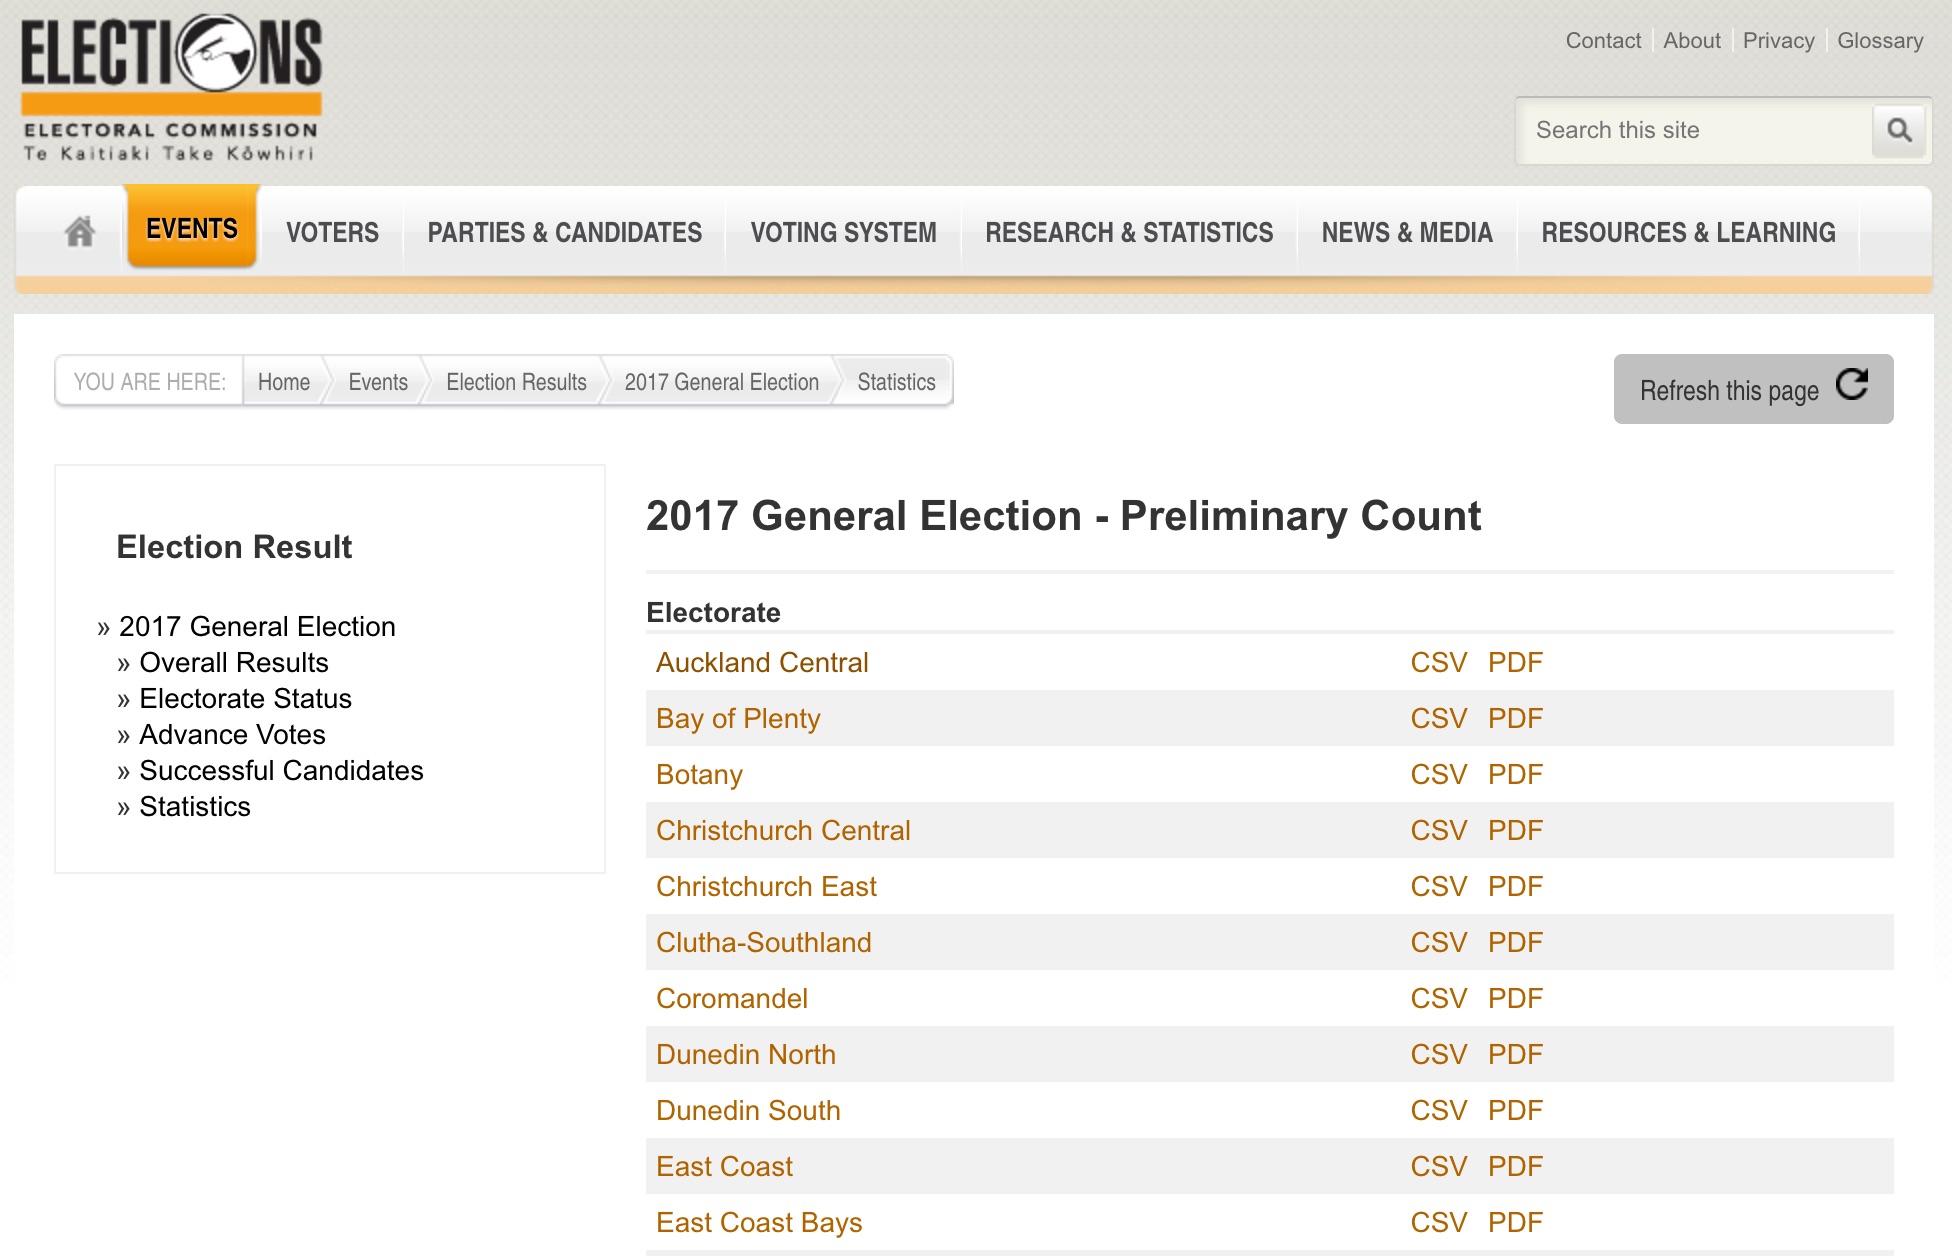 Collecting results of the New Zealand General Elections